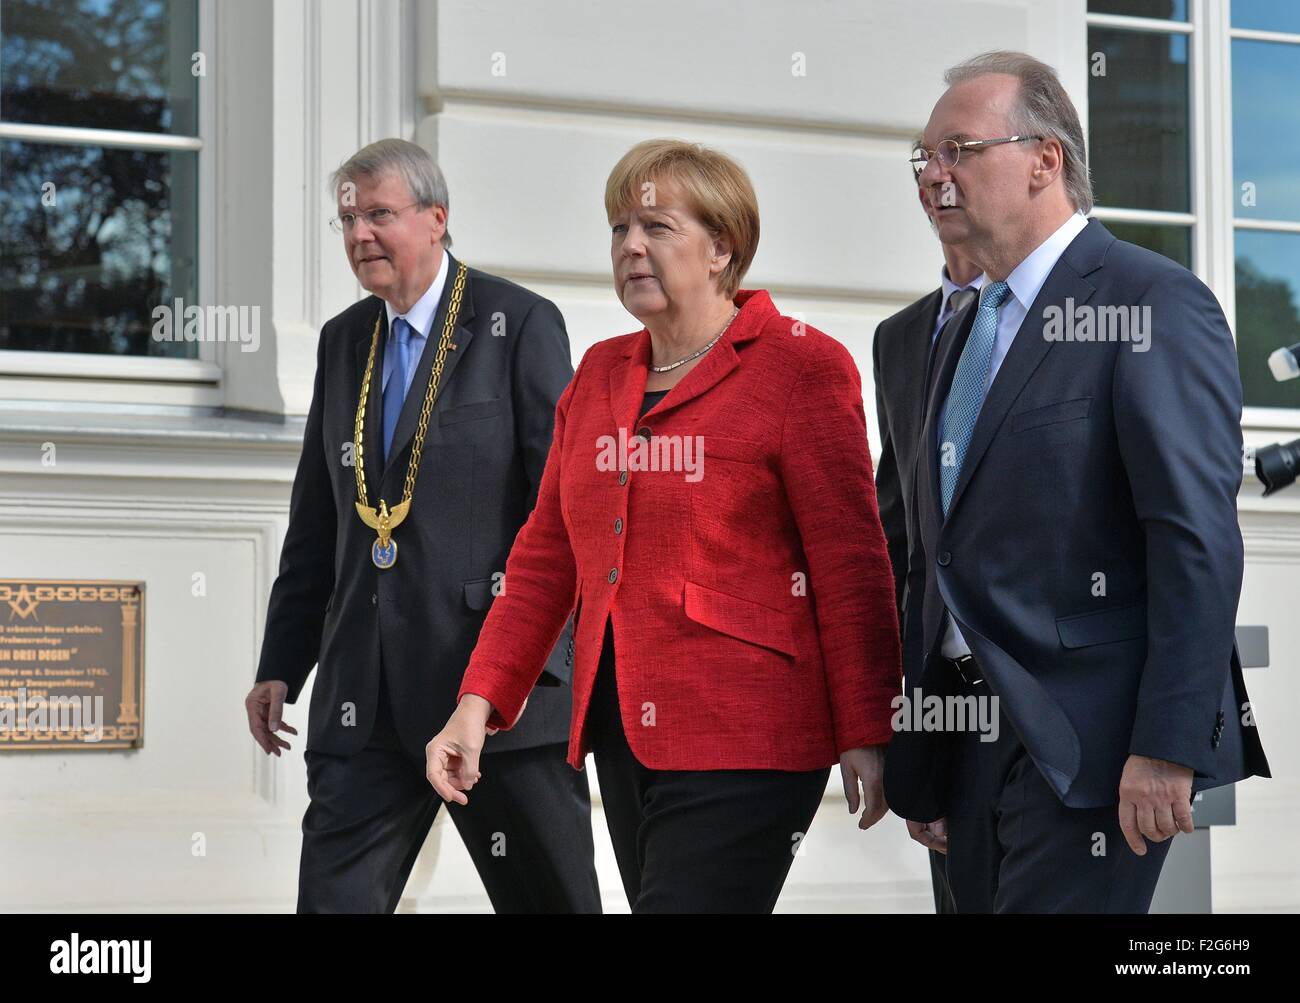 Halle, Germany. 18th Sep, 2015. German Chancellor (CDU) Angela Merkel arrives for the annual meeting of the Leopoldina German National Academy for Sciences with the Premier of Saxony-Anhalt, Reiner Haseloff (CDU, R) and the President of the Leopoldina Joerg Hacker in Halle, Germany, 18 September 2015. The event this year is being held under the title 'Symmetry and asymmetry in science and art' Photo: HENDRIK SCHMIDT/DPA/Alamy Live News Stock Photo